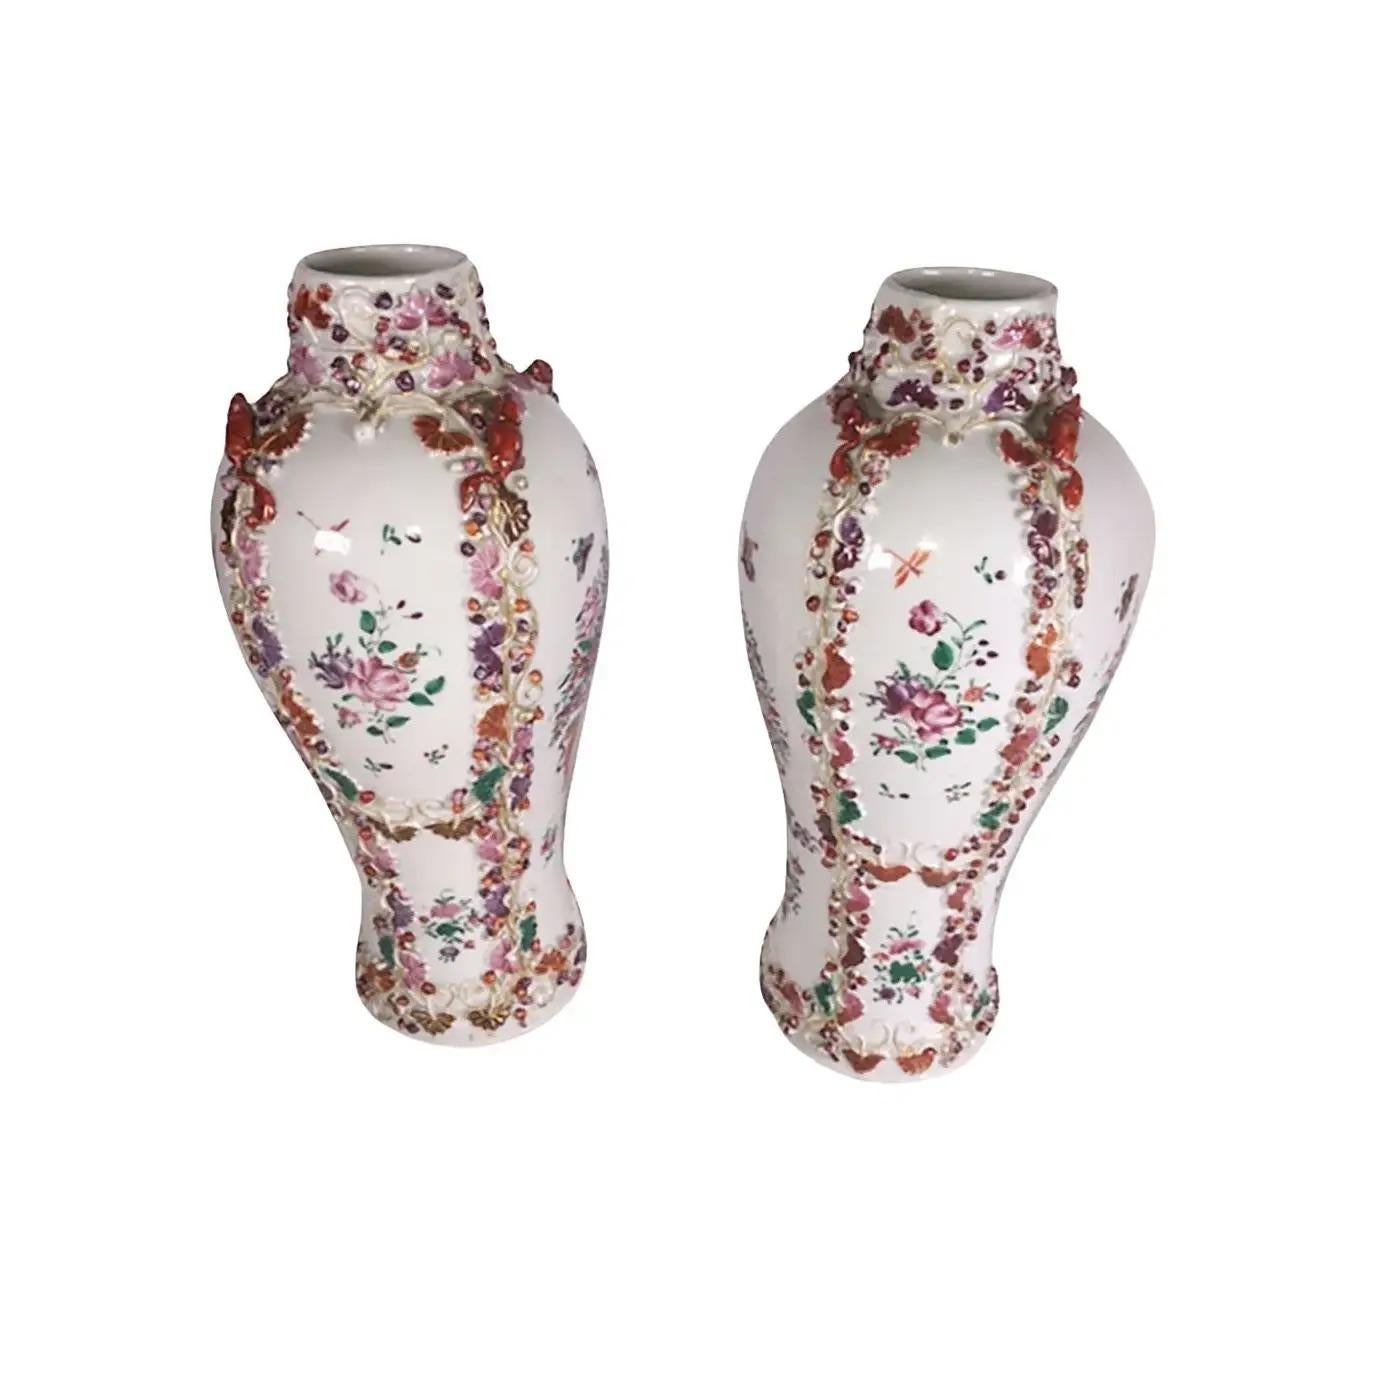 A pair of Chinese export porcelain vases with mice surrounding the top. Vases also with an urn, flowers and butterflies, circa 1780-1800.